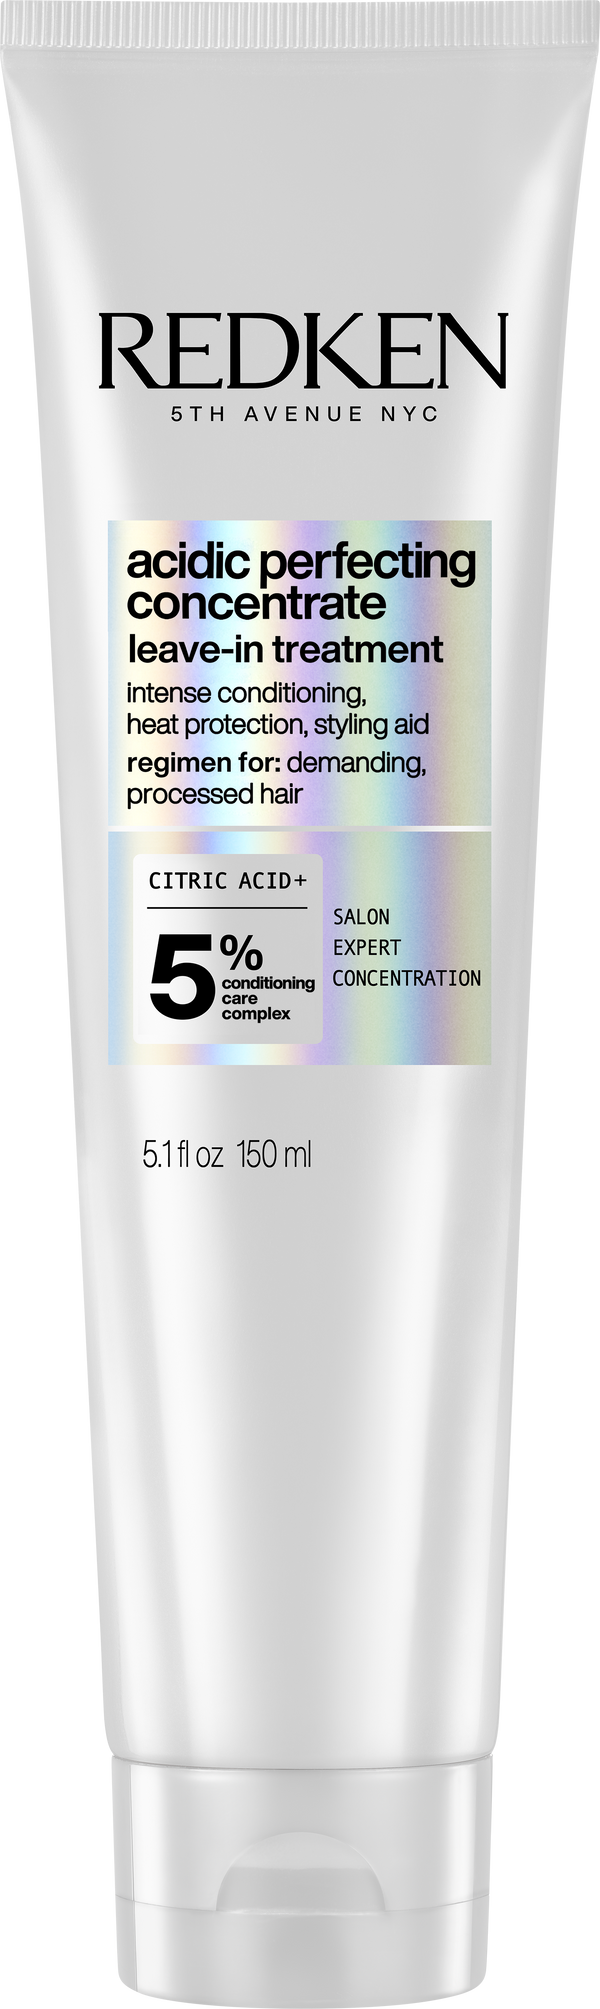 Acidic Perfecting Leave-In Treatment for Damaged Hair